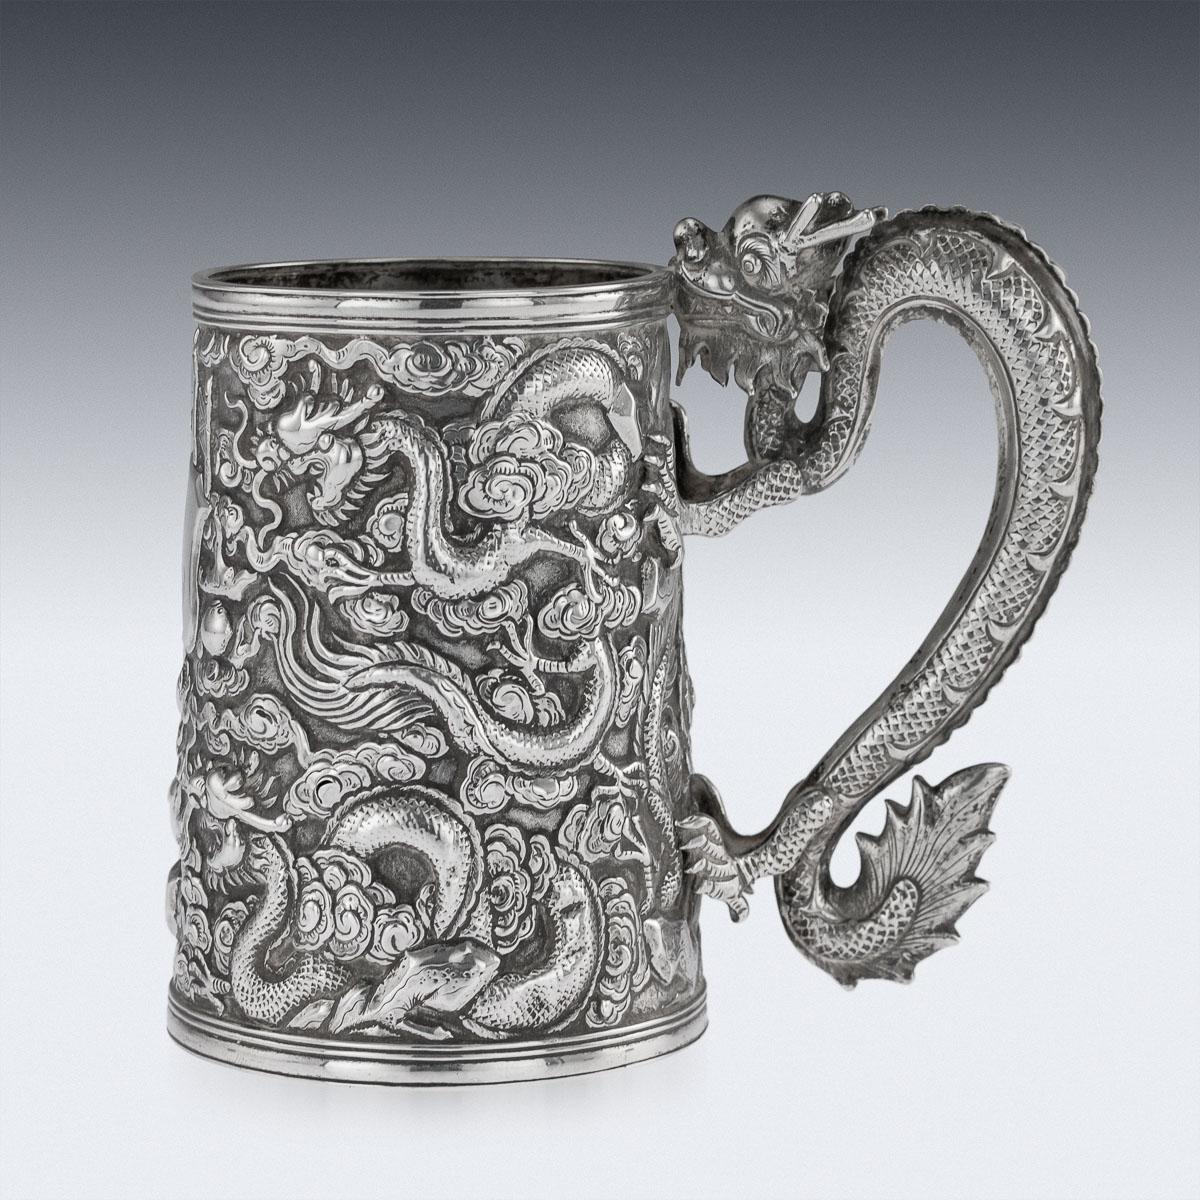 Antique 19th century Chinese export solid silver mug, tapering form, the double walled body is beautifully decorated in relief with dragons amongst clouds, very crisp and detailed, centering a shield engraved with elaborate initials, the handle is